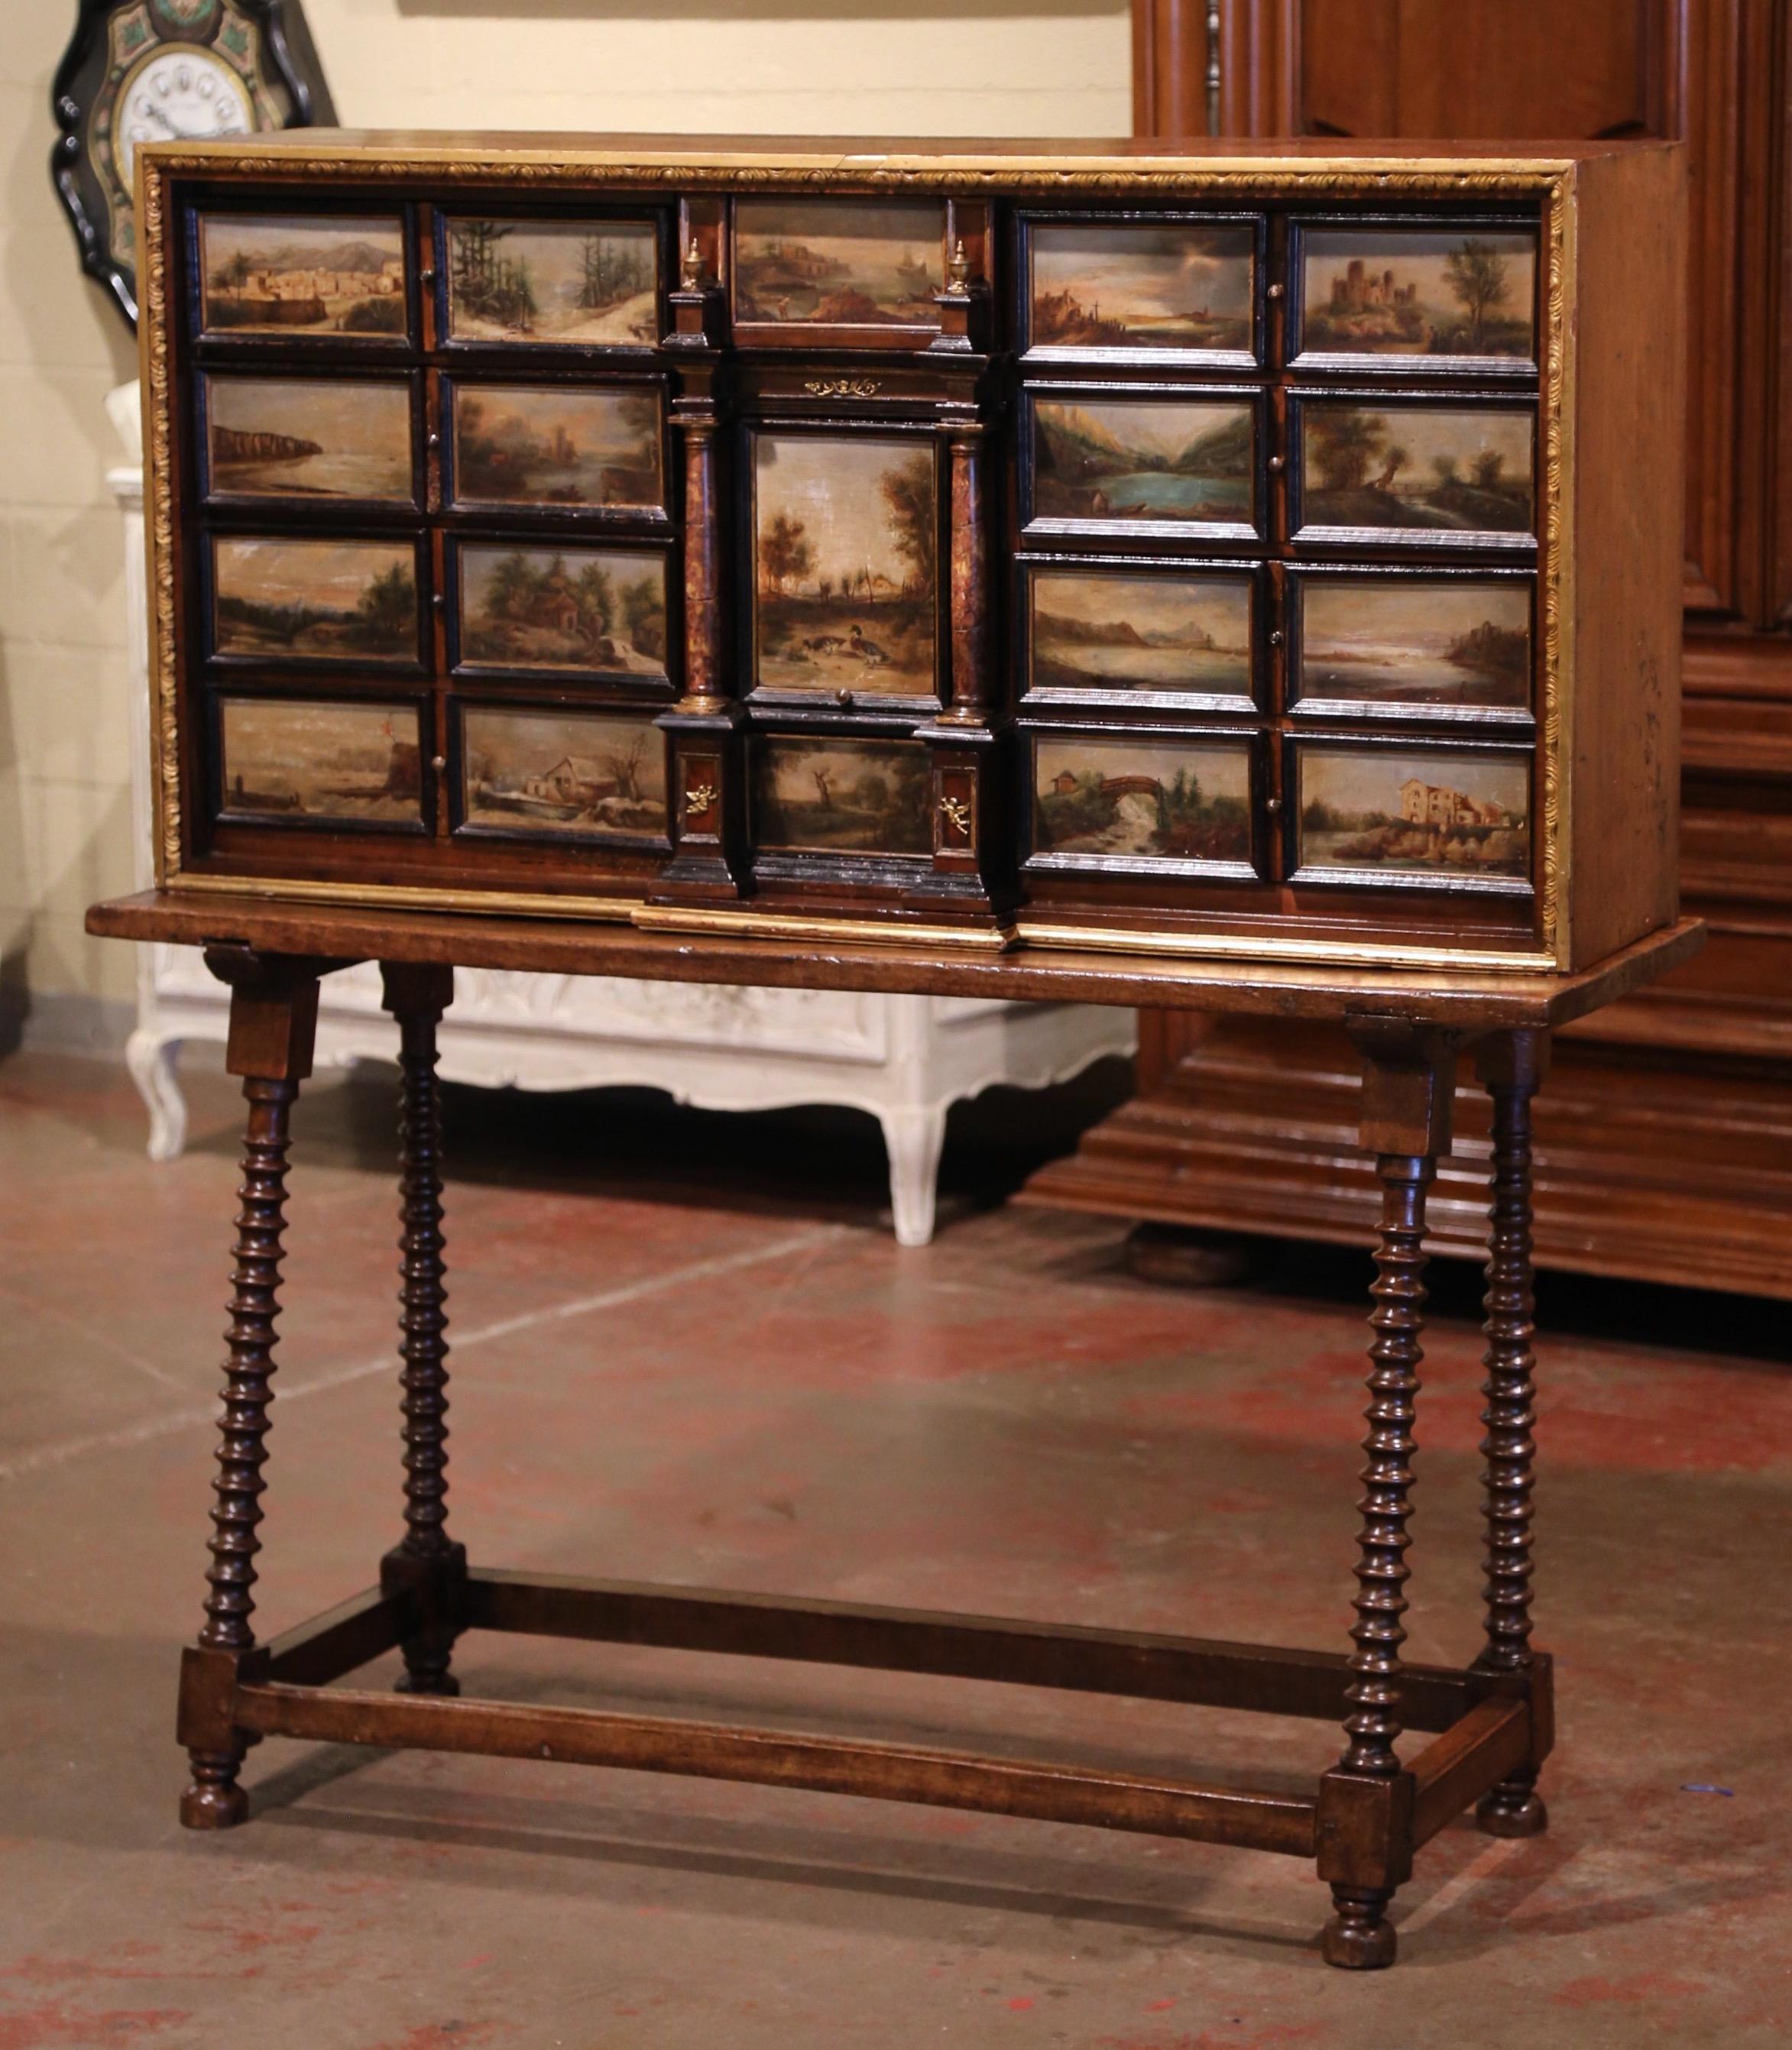 This elegant antique Bargueno (or Vargueño) was crafted in Spain circa 1850; sitting on the original fruitwood table base with turned legs embellished with a bottom stretcher, the cabinet features eleven drawers, including a larger center drawer